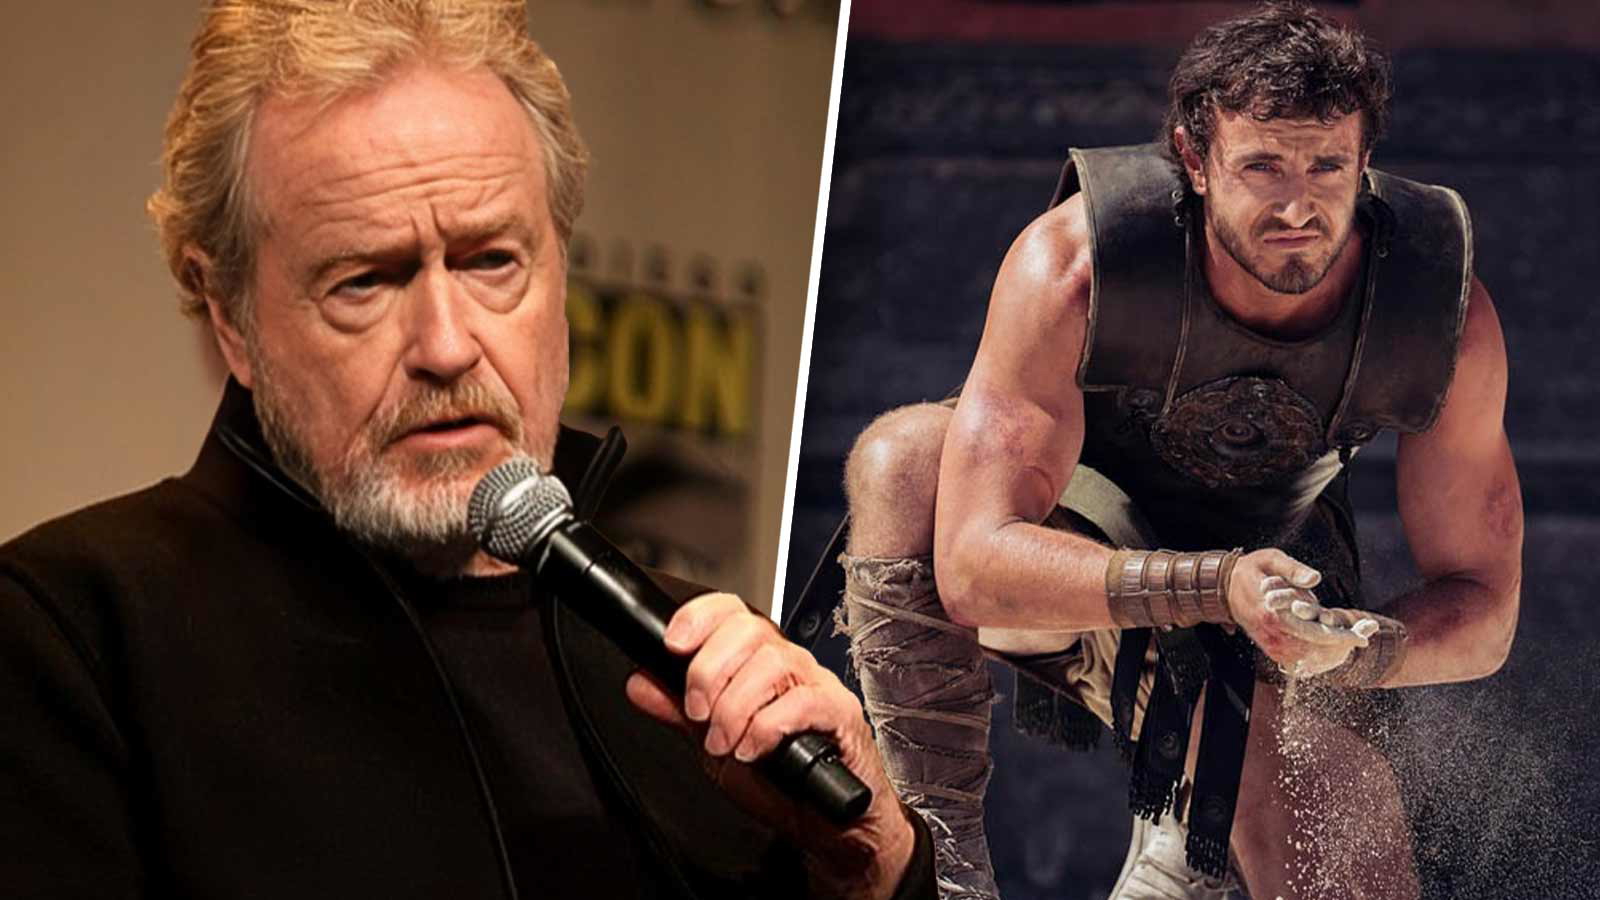 Paul Mescal’s Upcoming Film After ‘Gladiator 2’ Sounds So Epic, It Could Finally Win Him an Oscar if Ridley Scott’s Giant Venture Misses the Mark